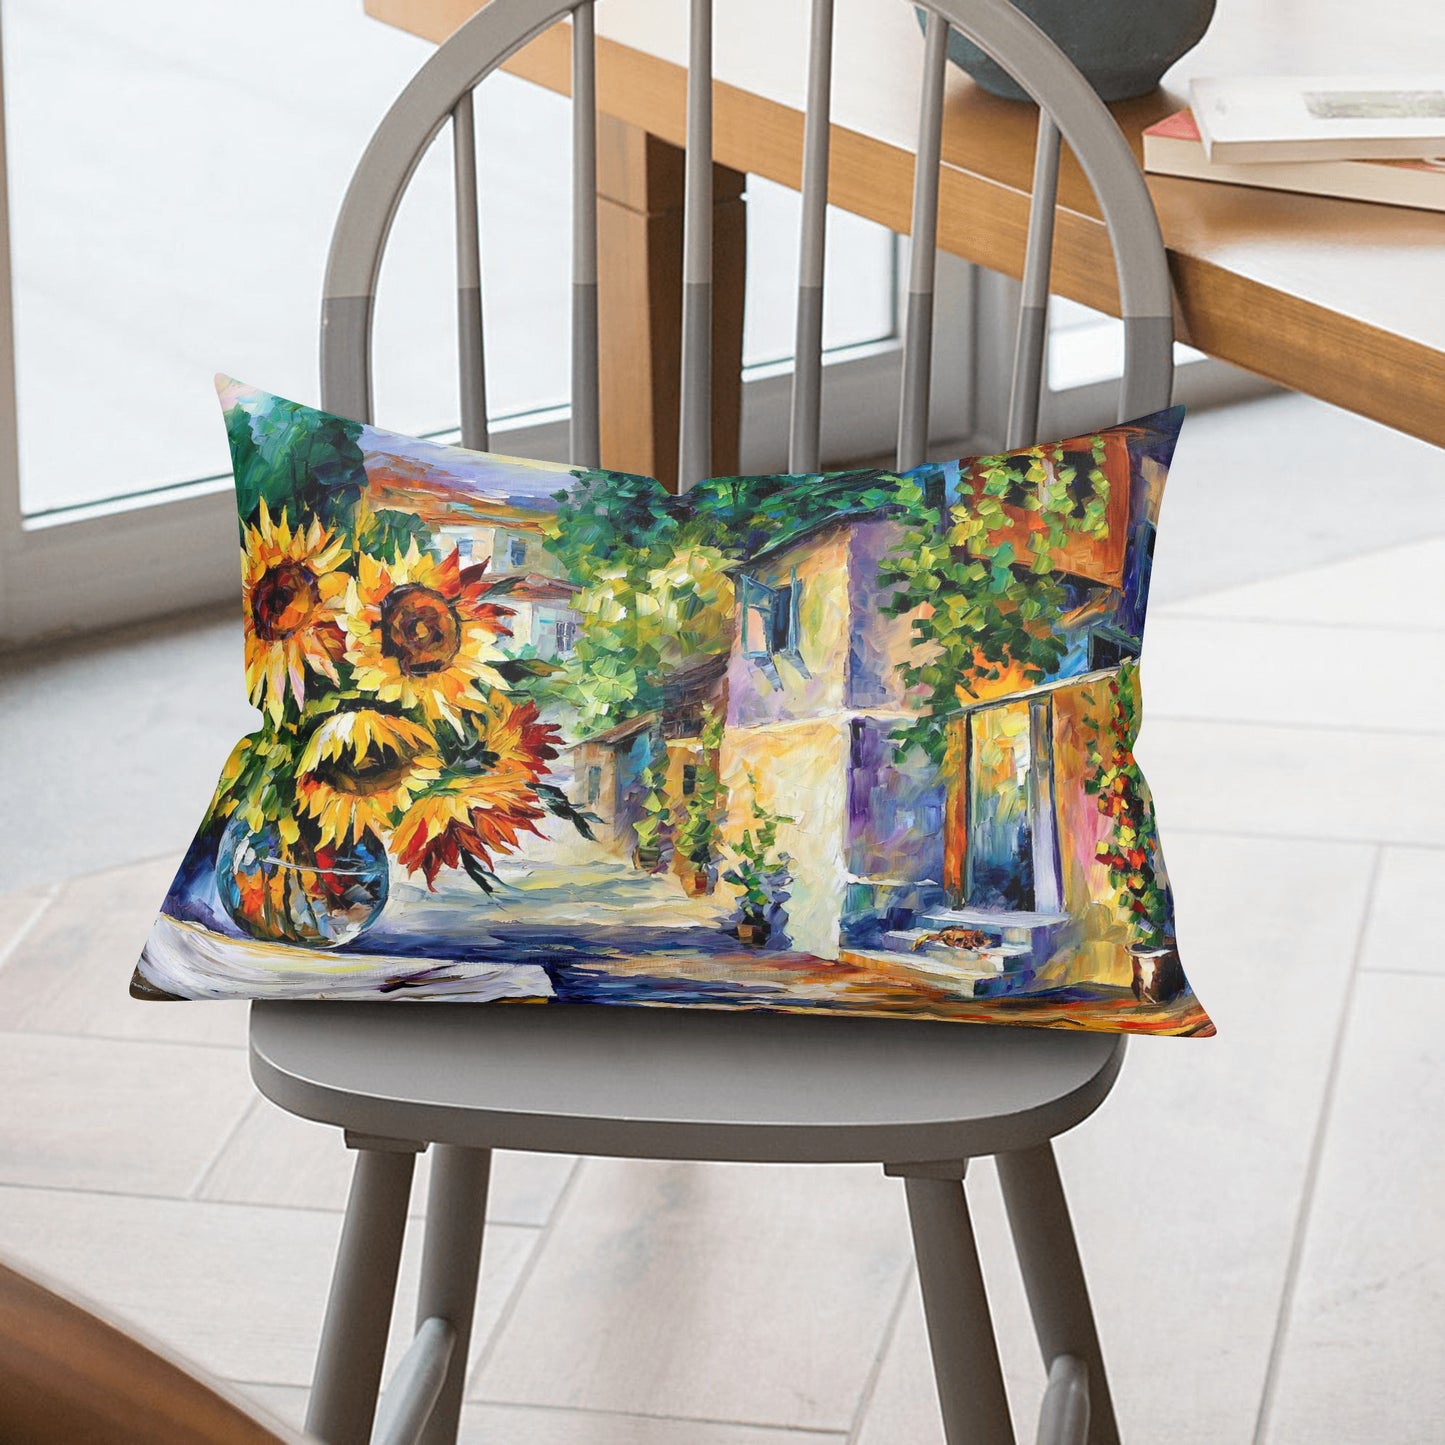 Double Side Printing Rectangular Pillow Cover Afremov GREEK NOON